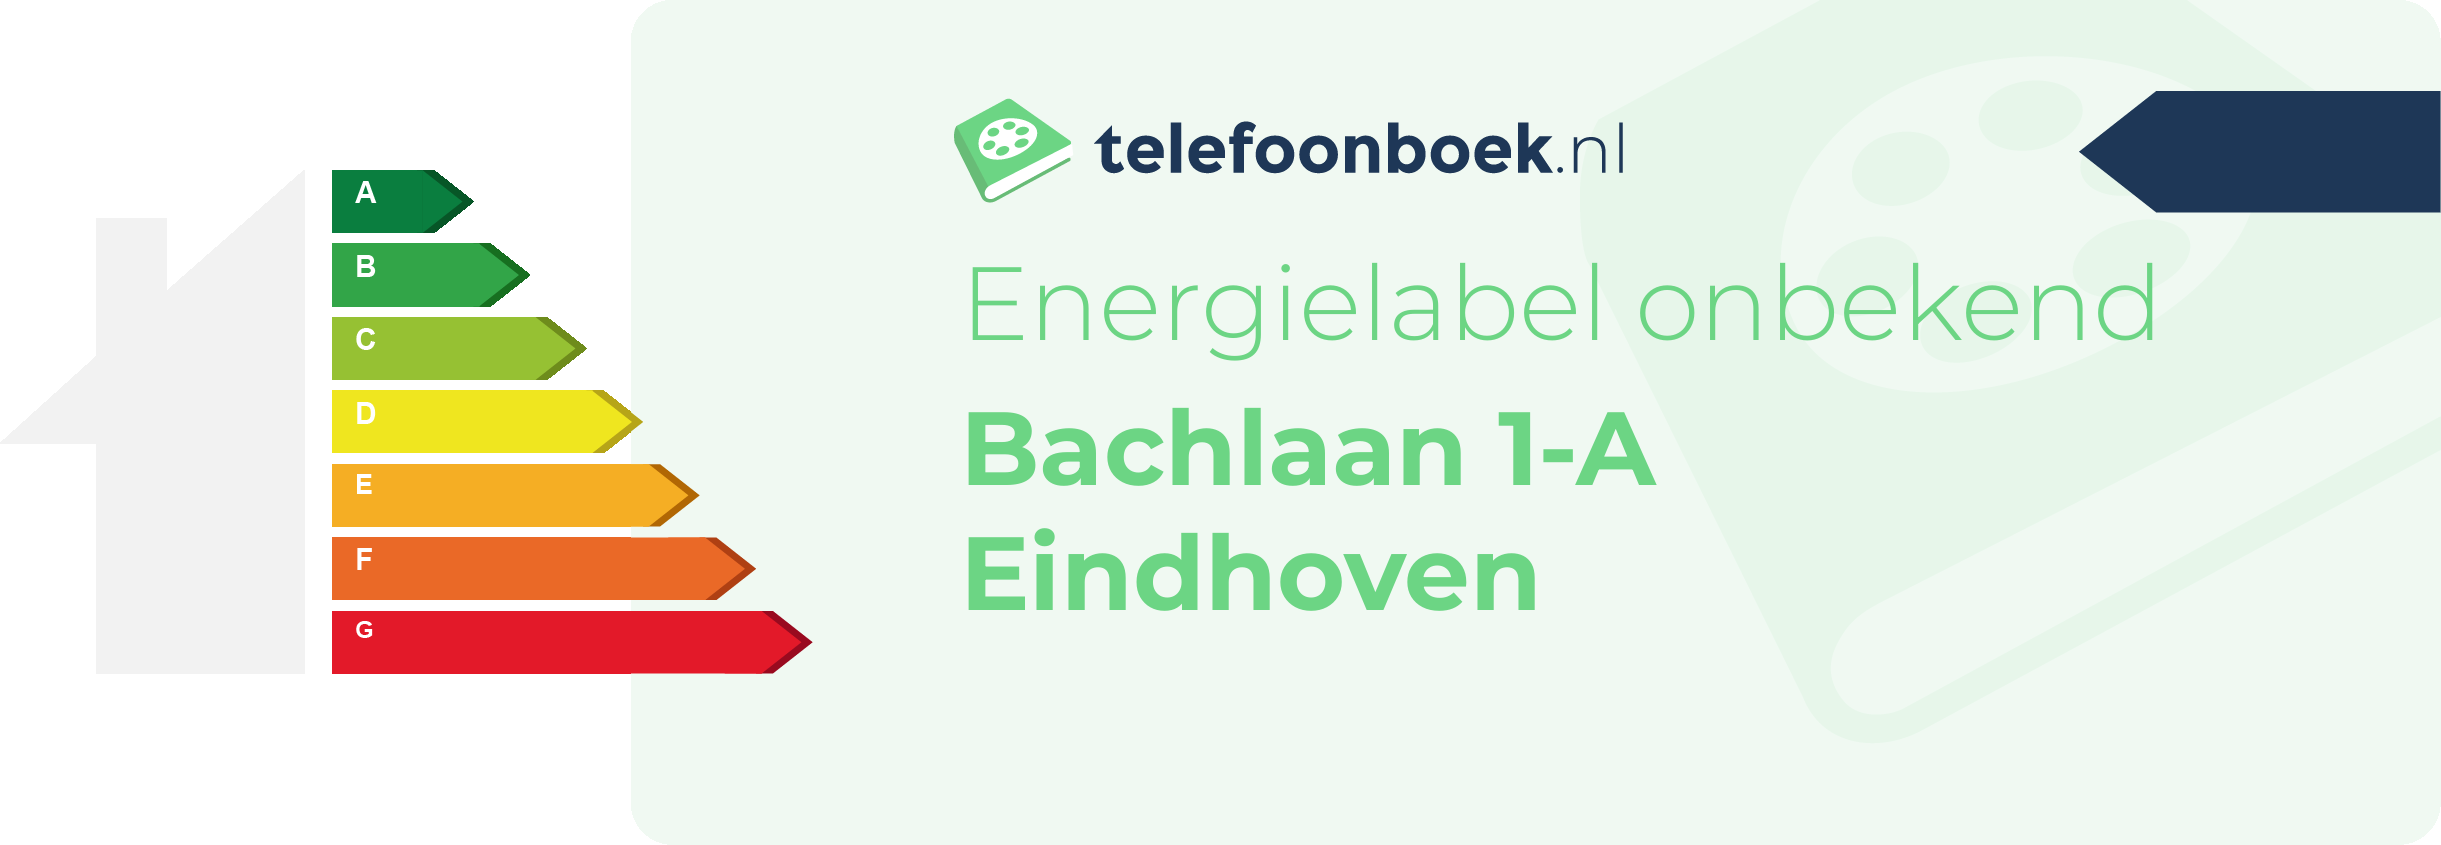 Energielabel Bachlaan 1-A Eindhoven